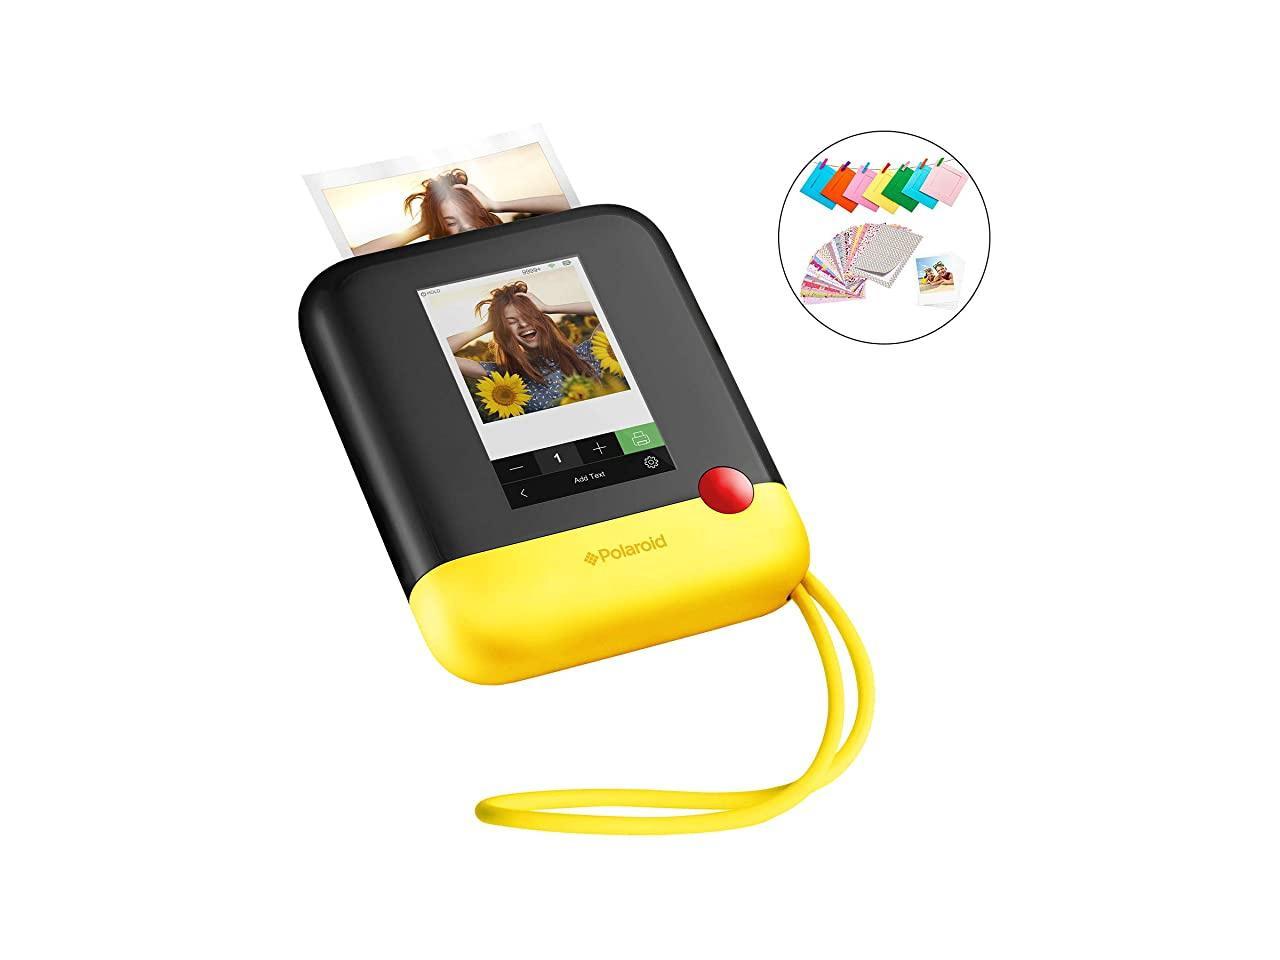 Polaroid Pop 20 2 In 1 Wireless Portable Instant 3x4 Photo Printer Amp Digital 20mp Camera With Touchscreen Display Builtin Wifi 1080p Hd Video Yellow Prints From Your Smartphone Newegg Com